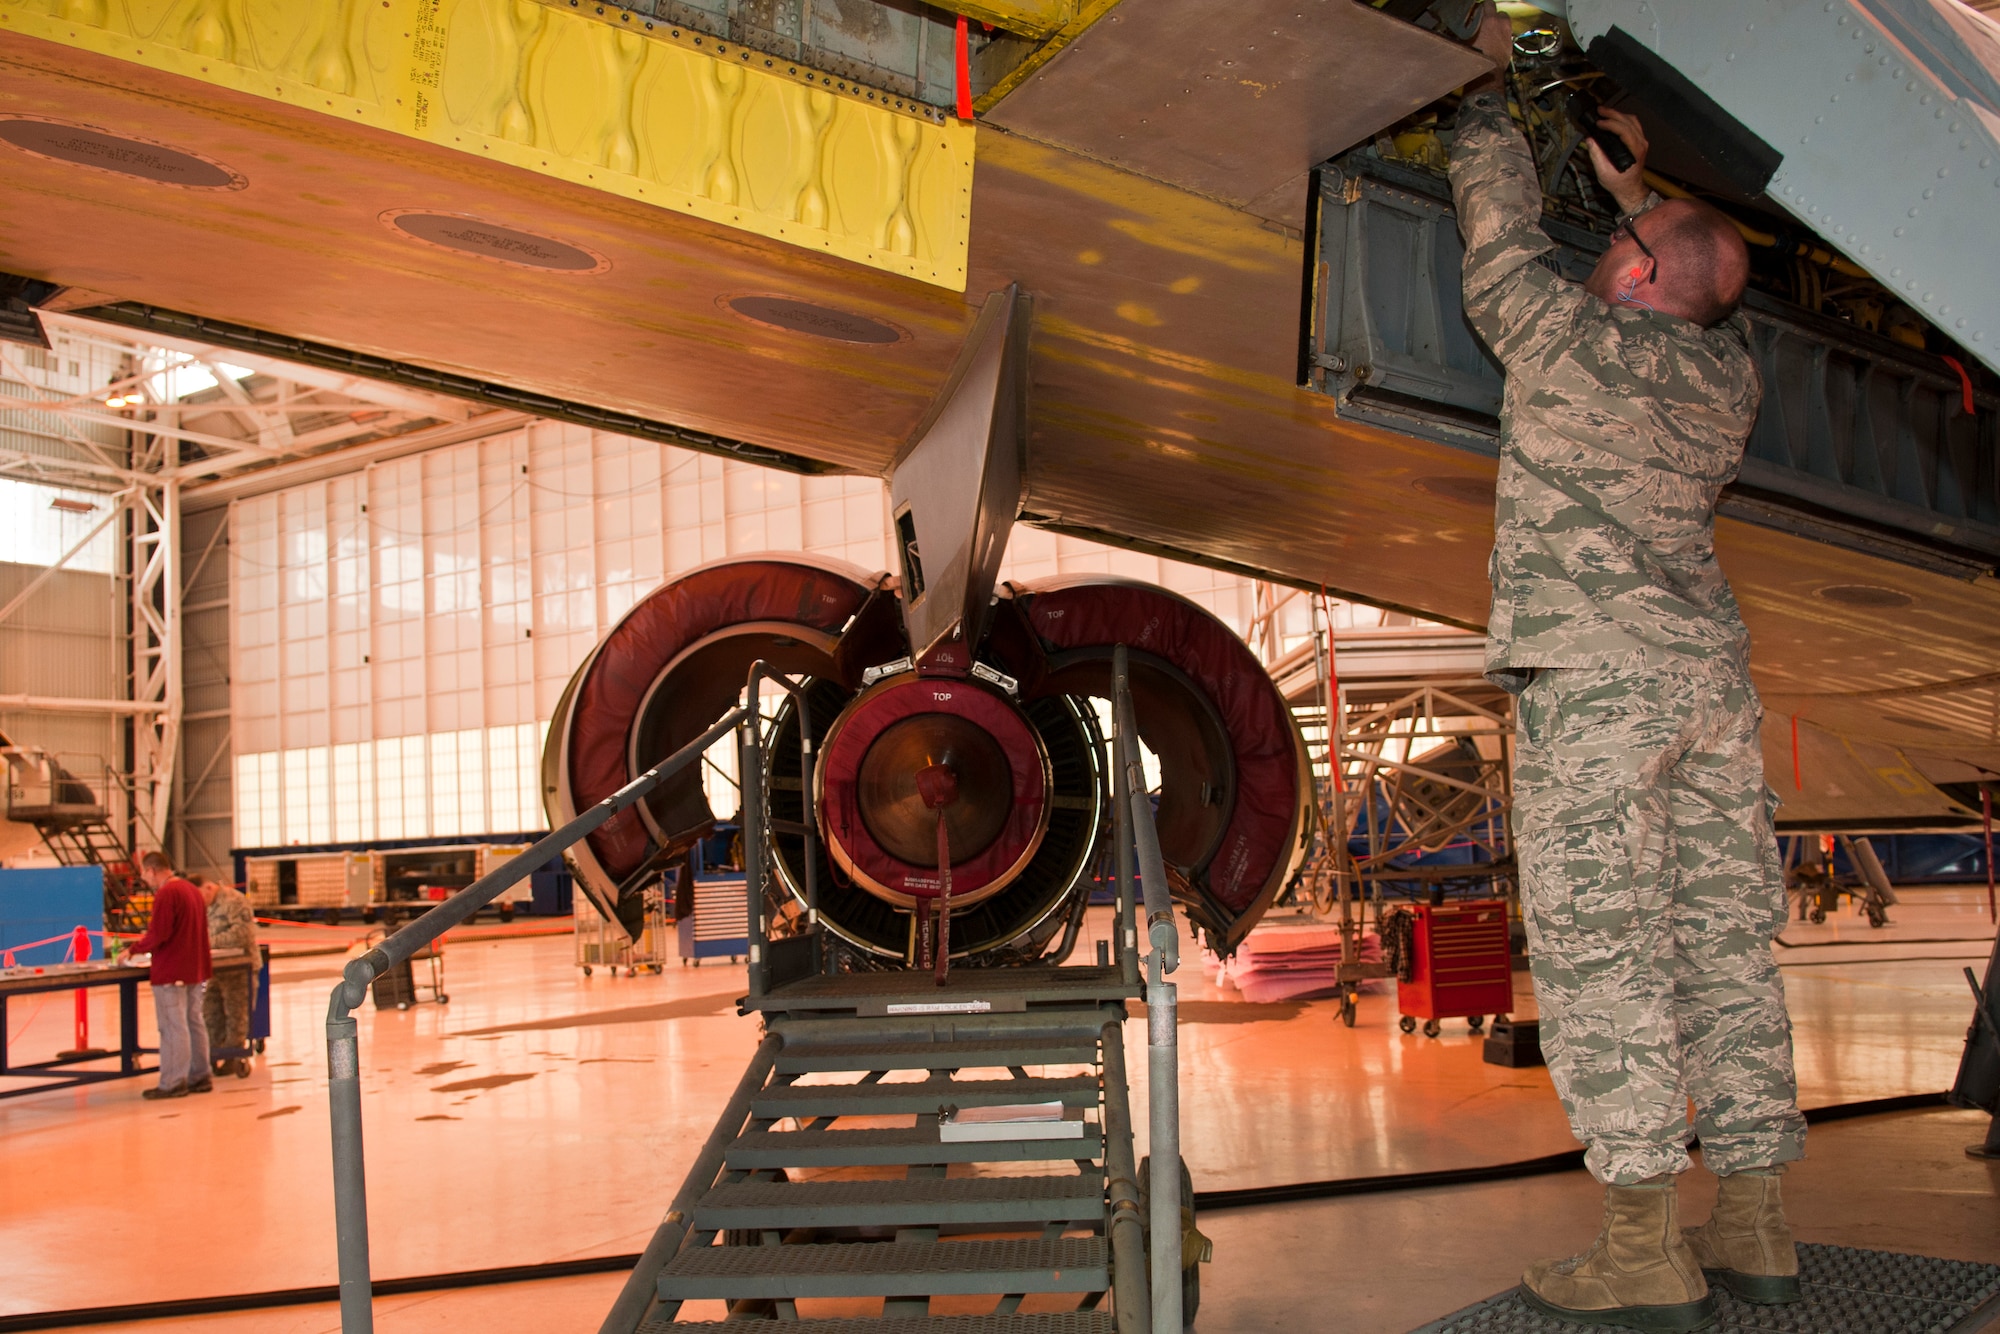 U.S. Air Force Master Sgt. Damon Drake, electrical and environmental specialist, 121st Air Refueling Wing, performs an inspection on a KC-135 Stratotanker during depot maintenance as part of Operation Team Spirit, Tinker Air Force Base, Okla., Mar. 2, 2015. The program teams unit maintenance Airmen up with depot facility personnel to perform inspections on aircraft as part of the depot maintenance process. (U.S. Air National Guard photo by Senior Airman Wendy Kuhn/Released)